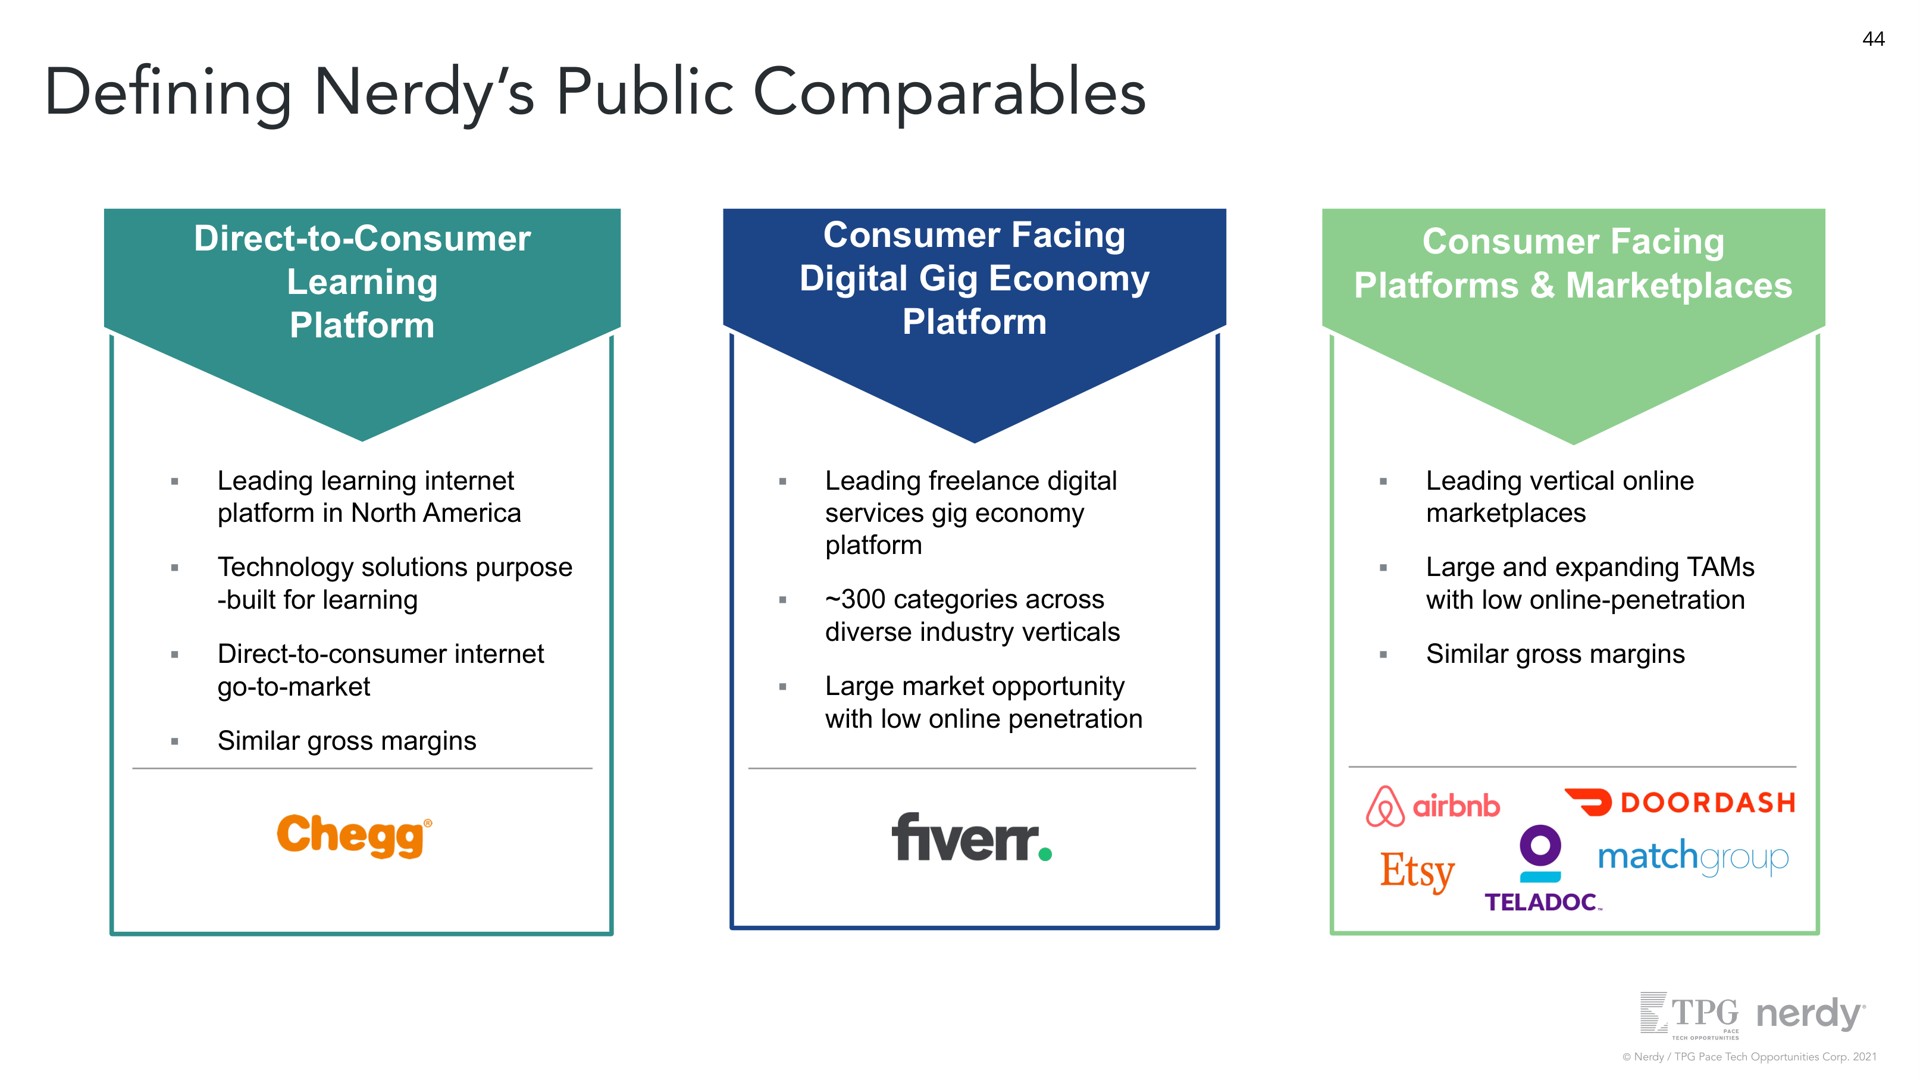 public direct to consumer learning platform consumer facing digital gig economy platform consumer facing platforms leading learning platform in north technology solutions purpose built for learning direct to consumer go to market similar gross margins leading digital services gig economy platform categories across diverse industry verticals large market opportunity with low penetration leading vertical large and expanding tams with low penetration similar gross margins defining | Nerdy